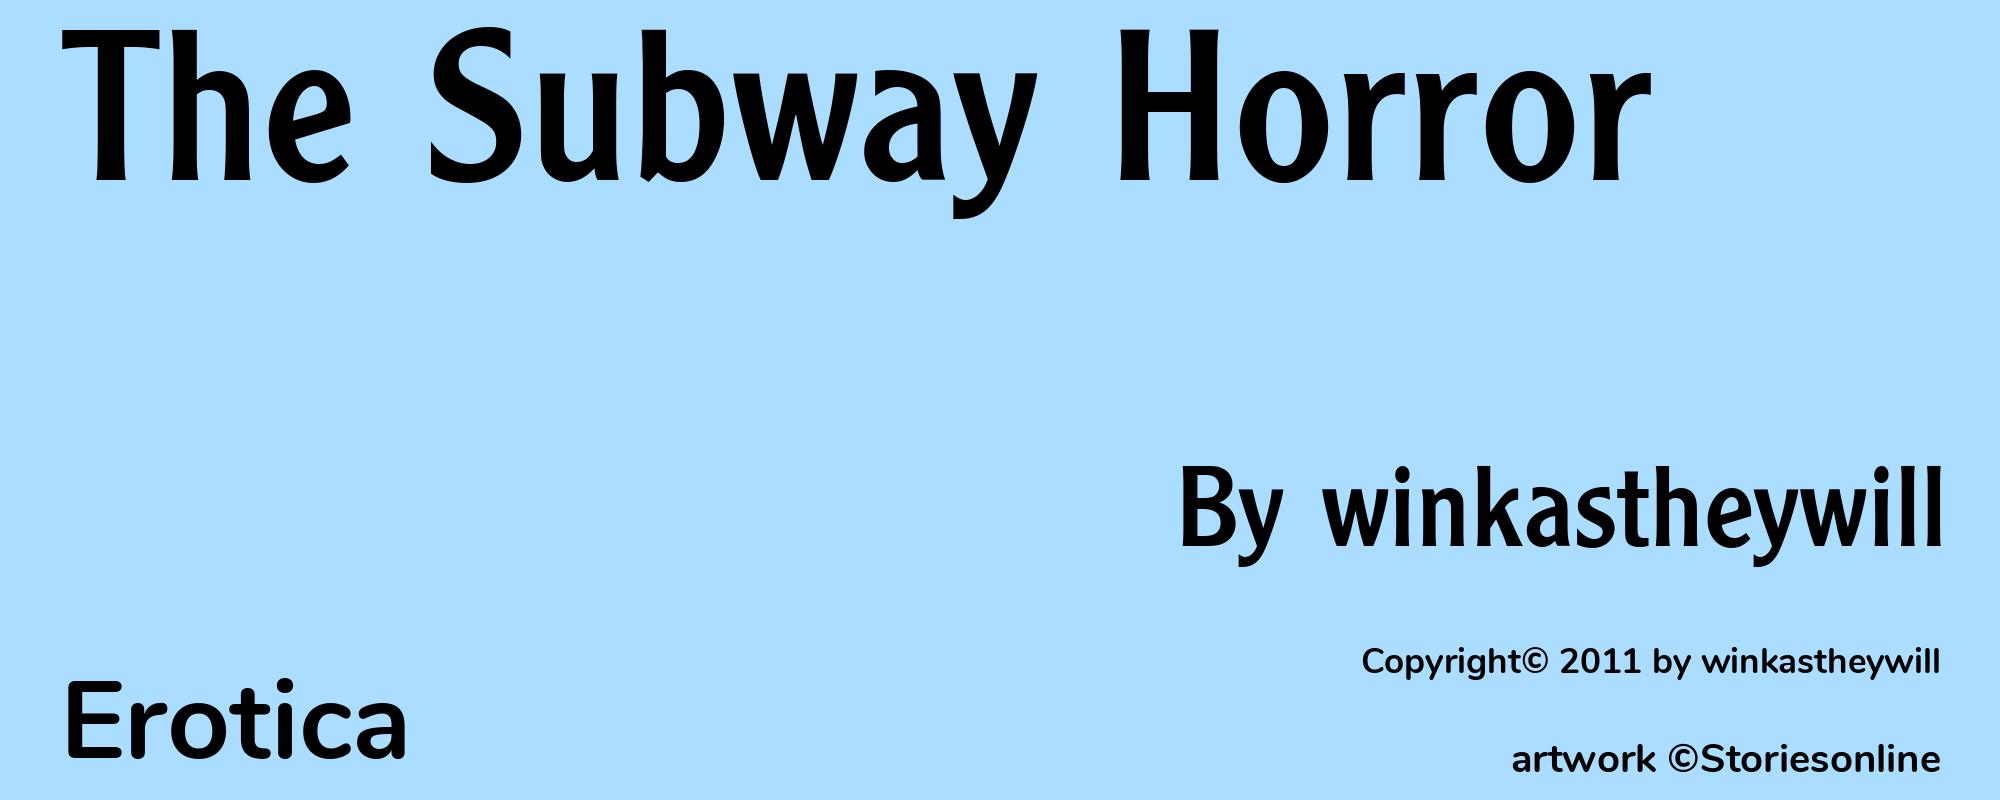 The Subway Horror - Cover